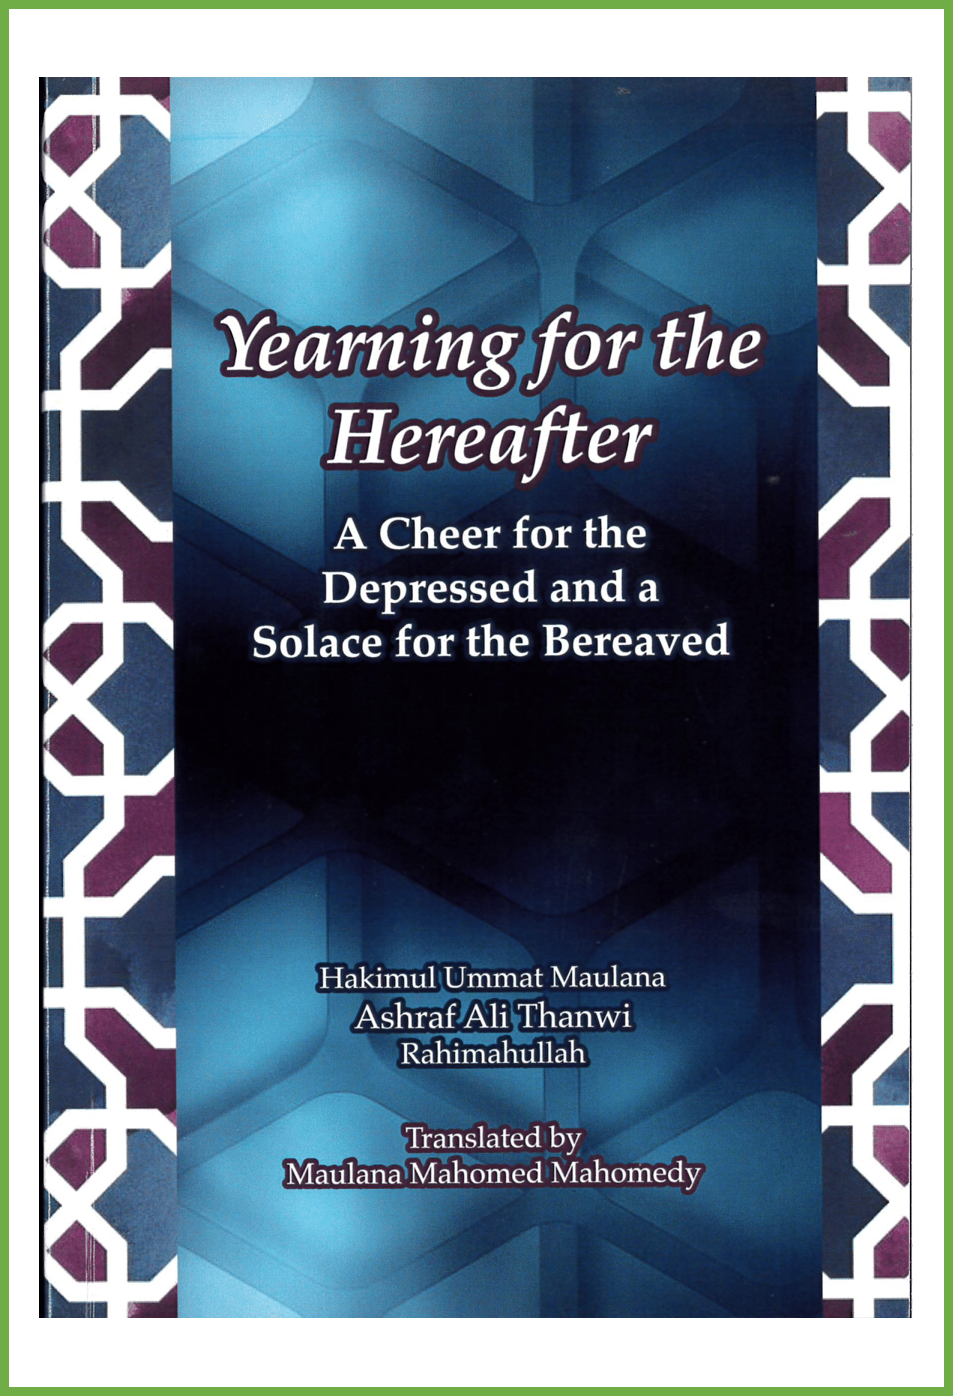 Yearning for the Hereafter